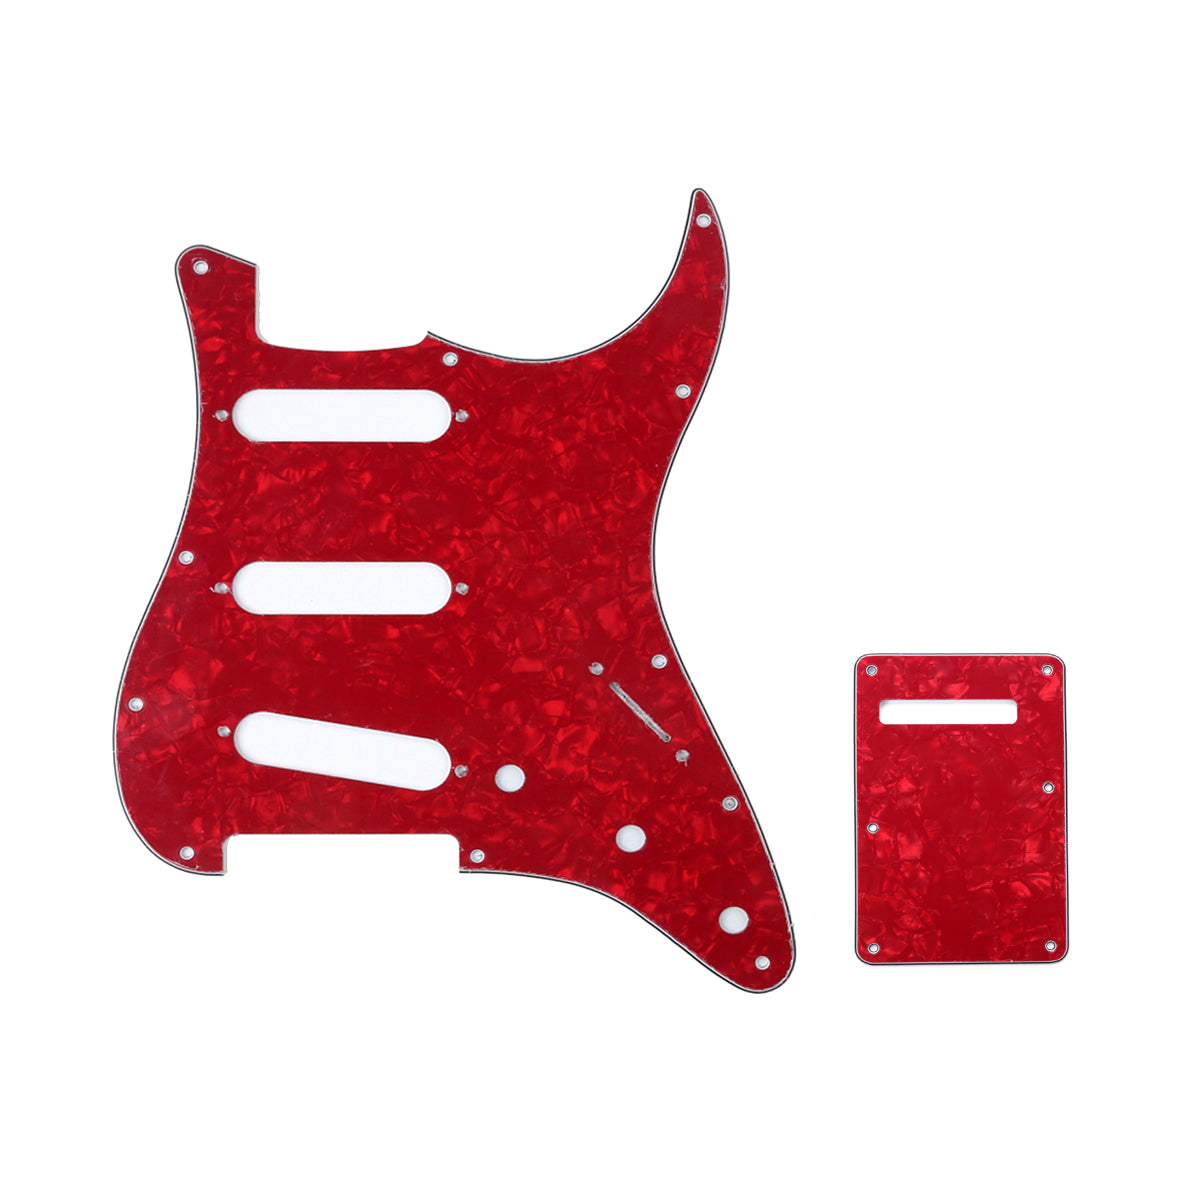 Musiclily SSS 11 Hole Strat Guitar Pickguard and BackPlate Set for Fender USA/Mexican Standard Stratocaster Modern Style, 4Ply Red Pearl